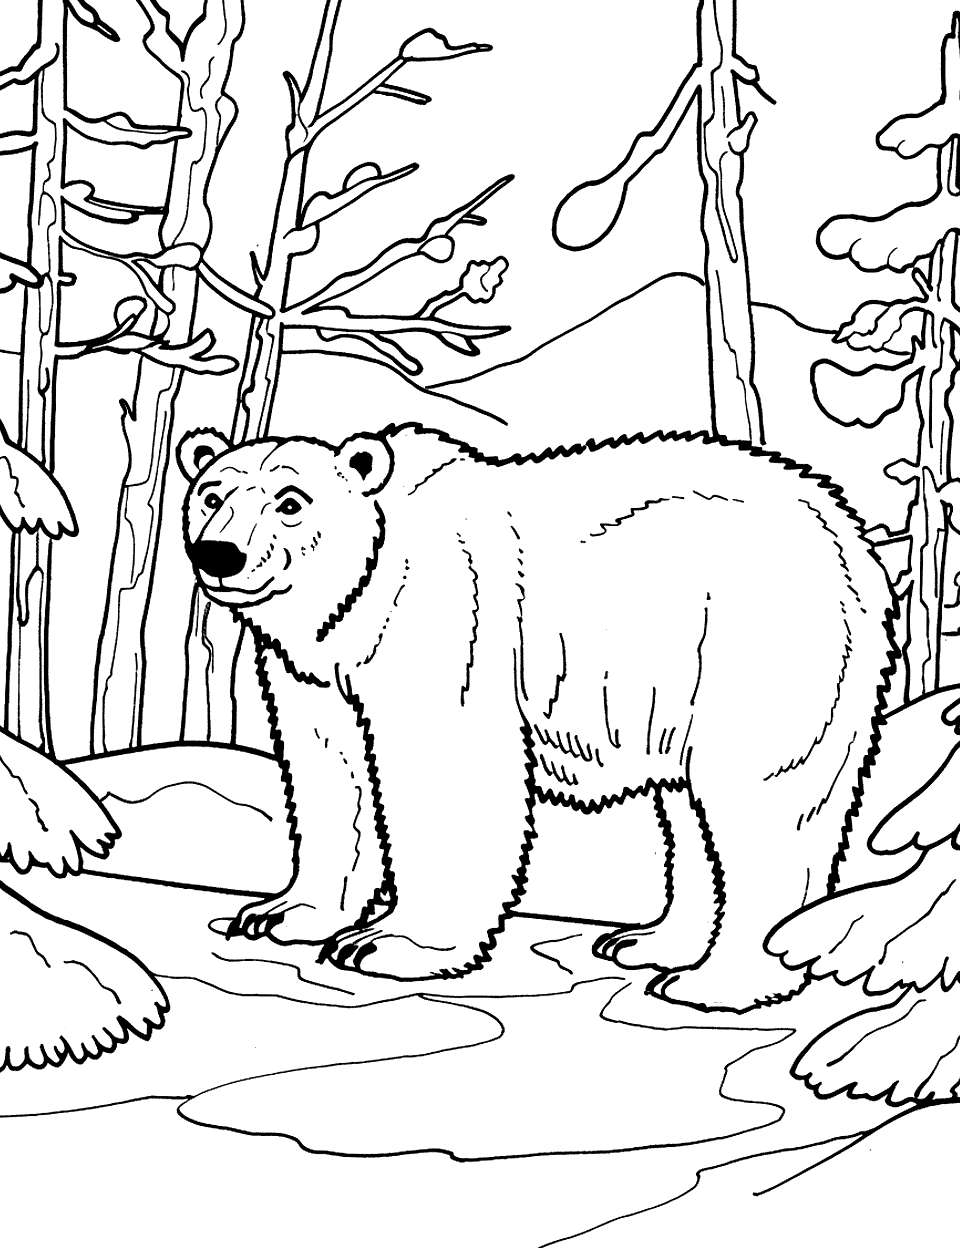 Polar Bear with Snow Covered Trees Coloring Page - A polar bear wandering through snow-covered trees.